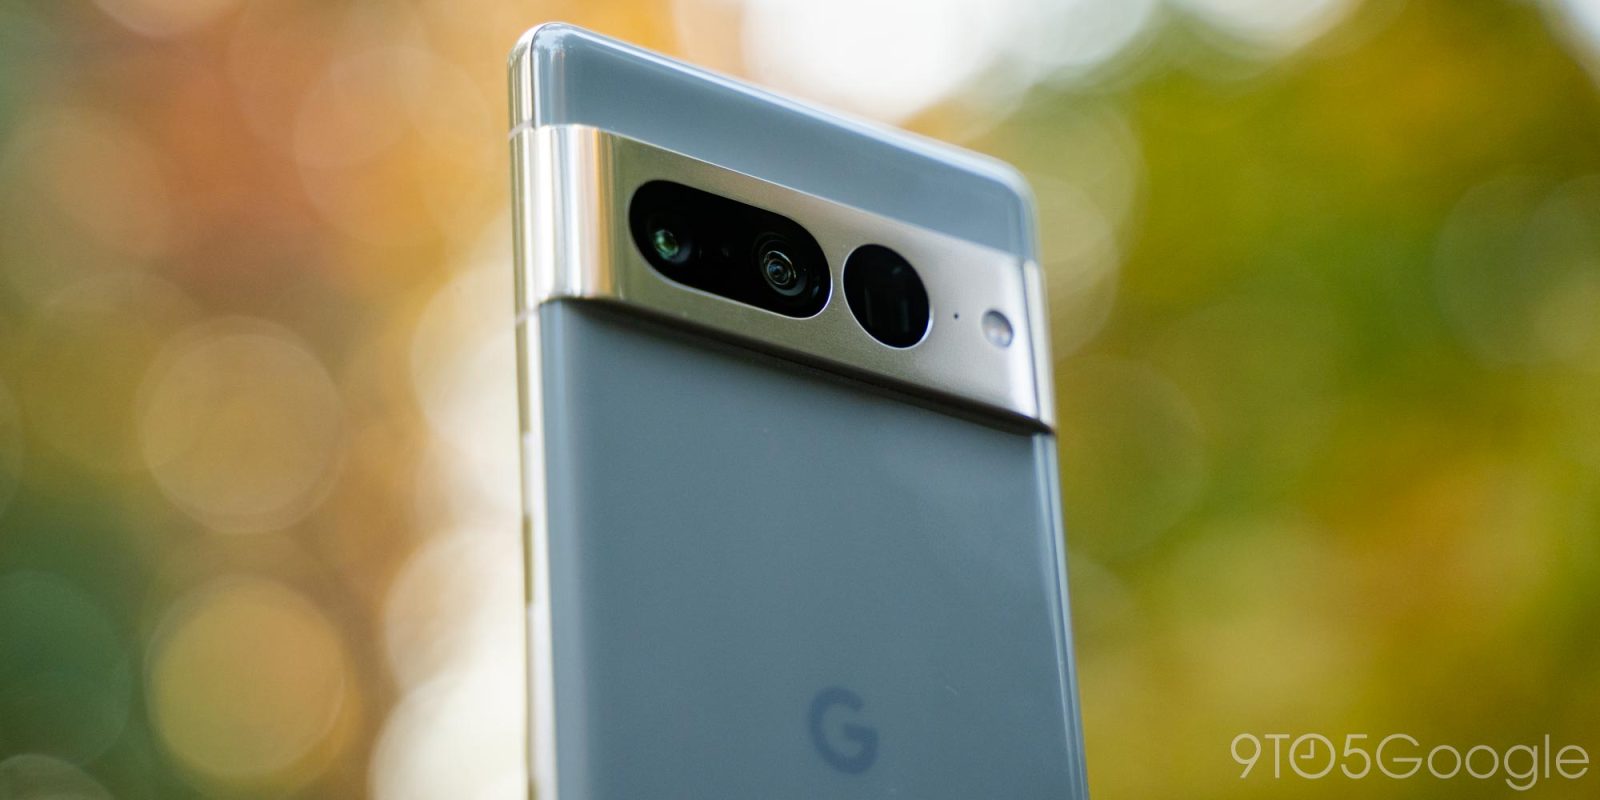 Google Pixel 7 Pro 256GB is an even better value with $461 discount to $538  on